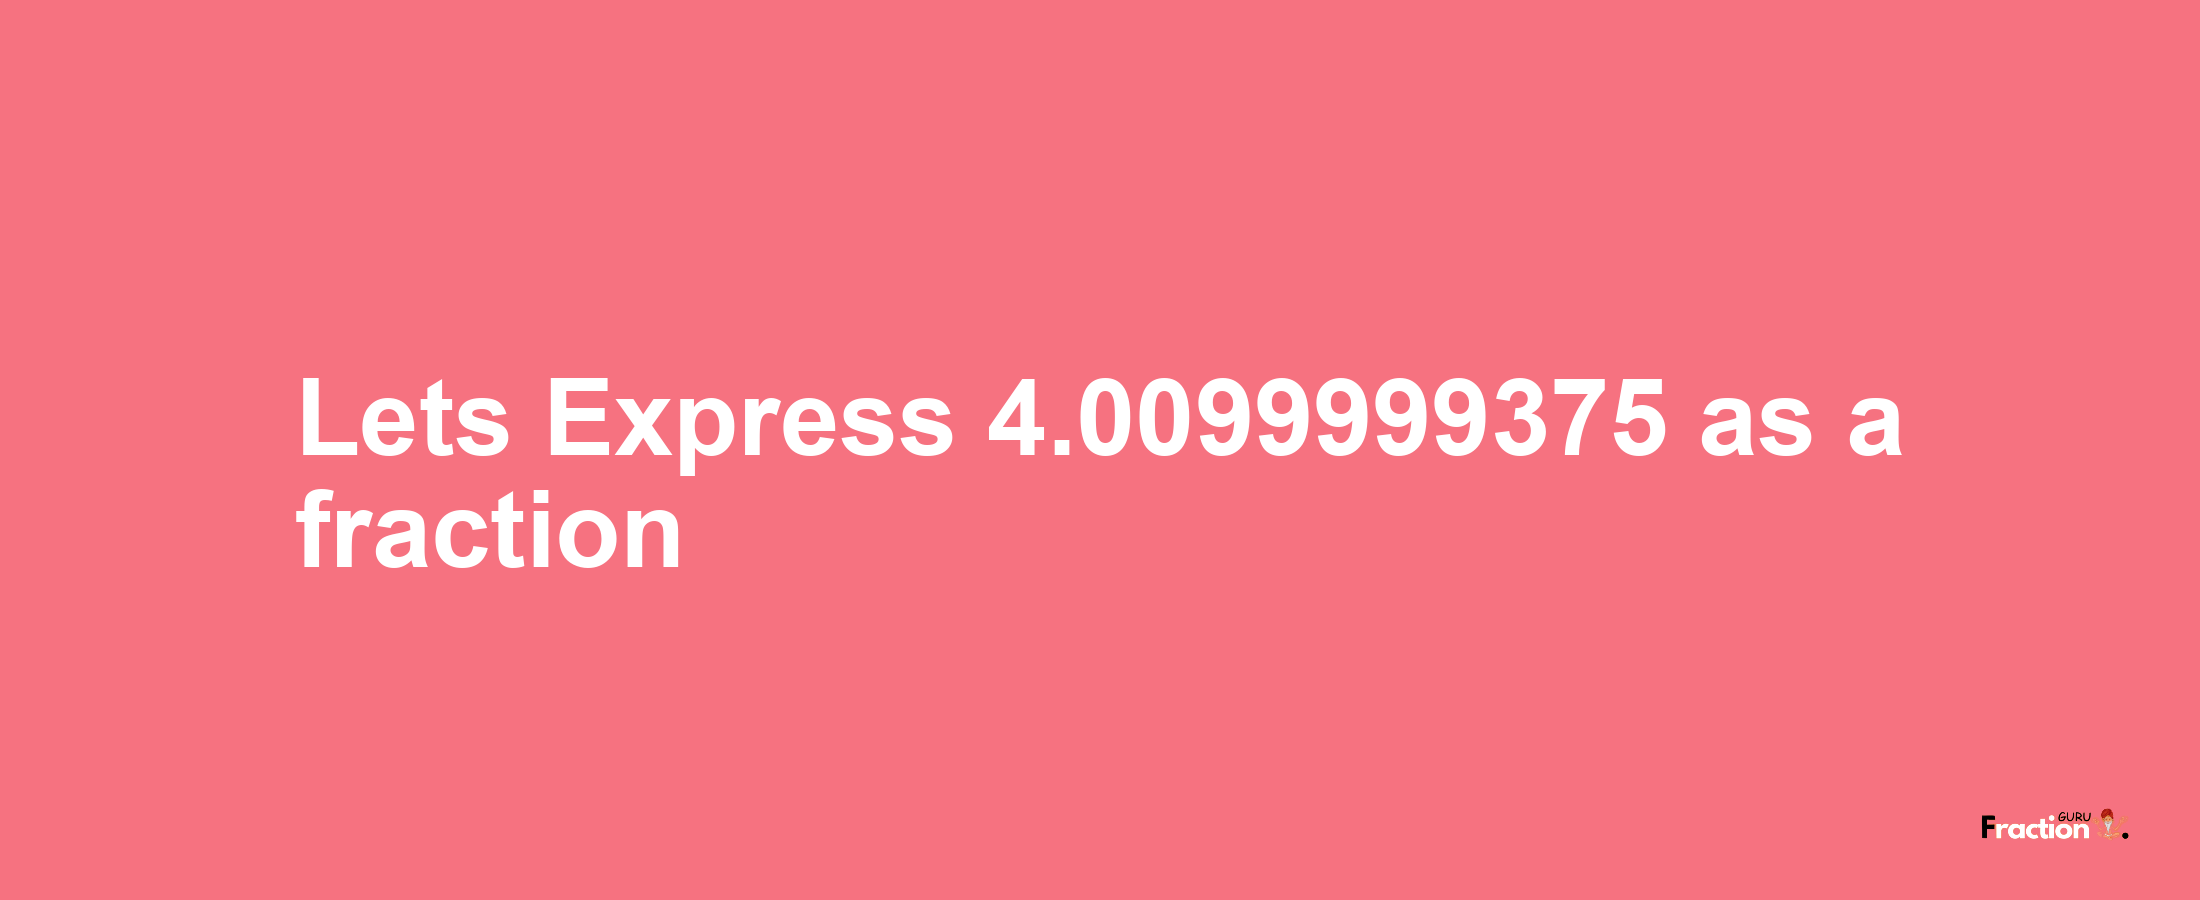 Lets Express 4.0099999375 as afraction